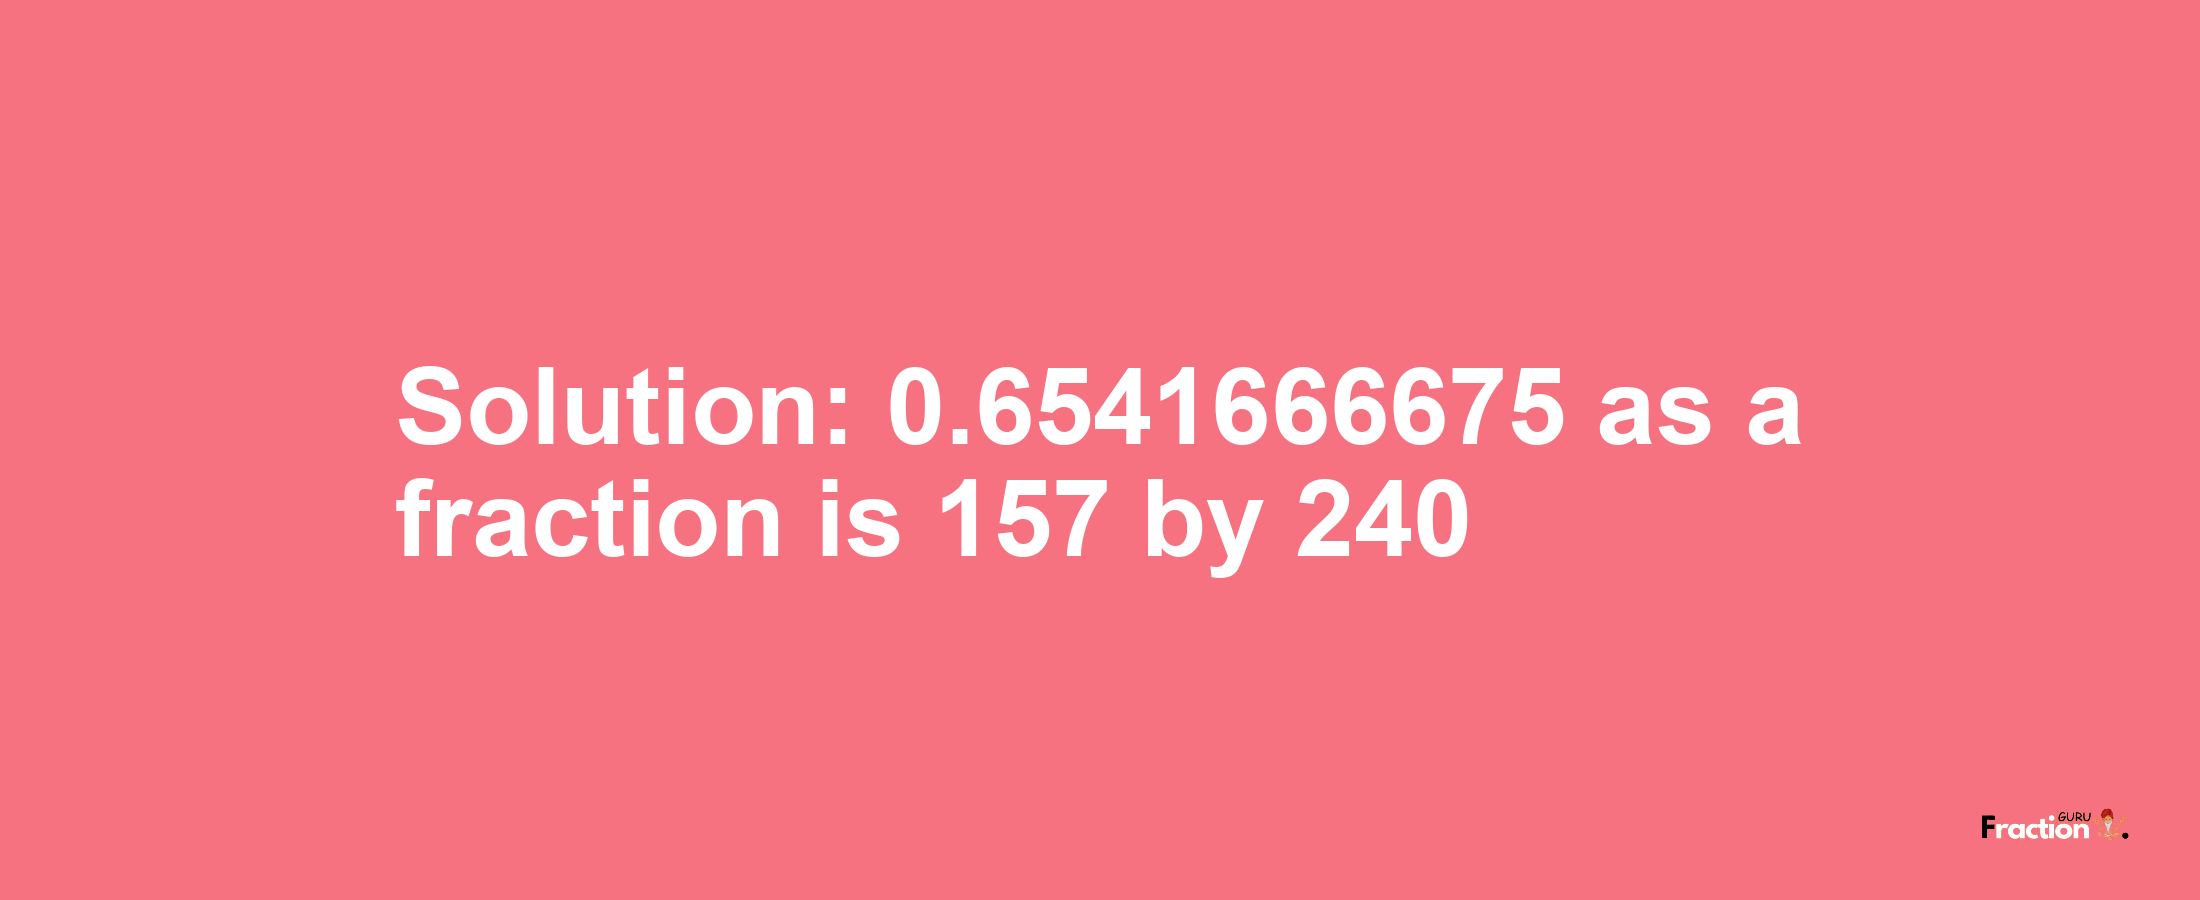 Solution:0.6541666675 as a fraction is 157/240